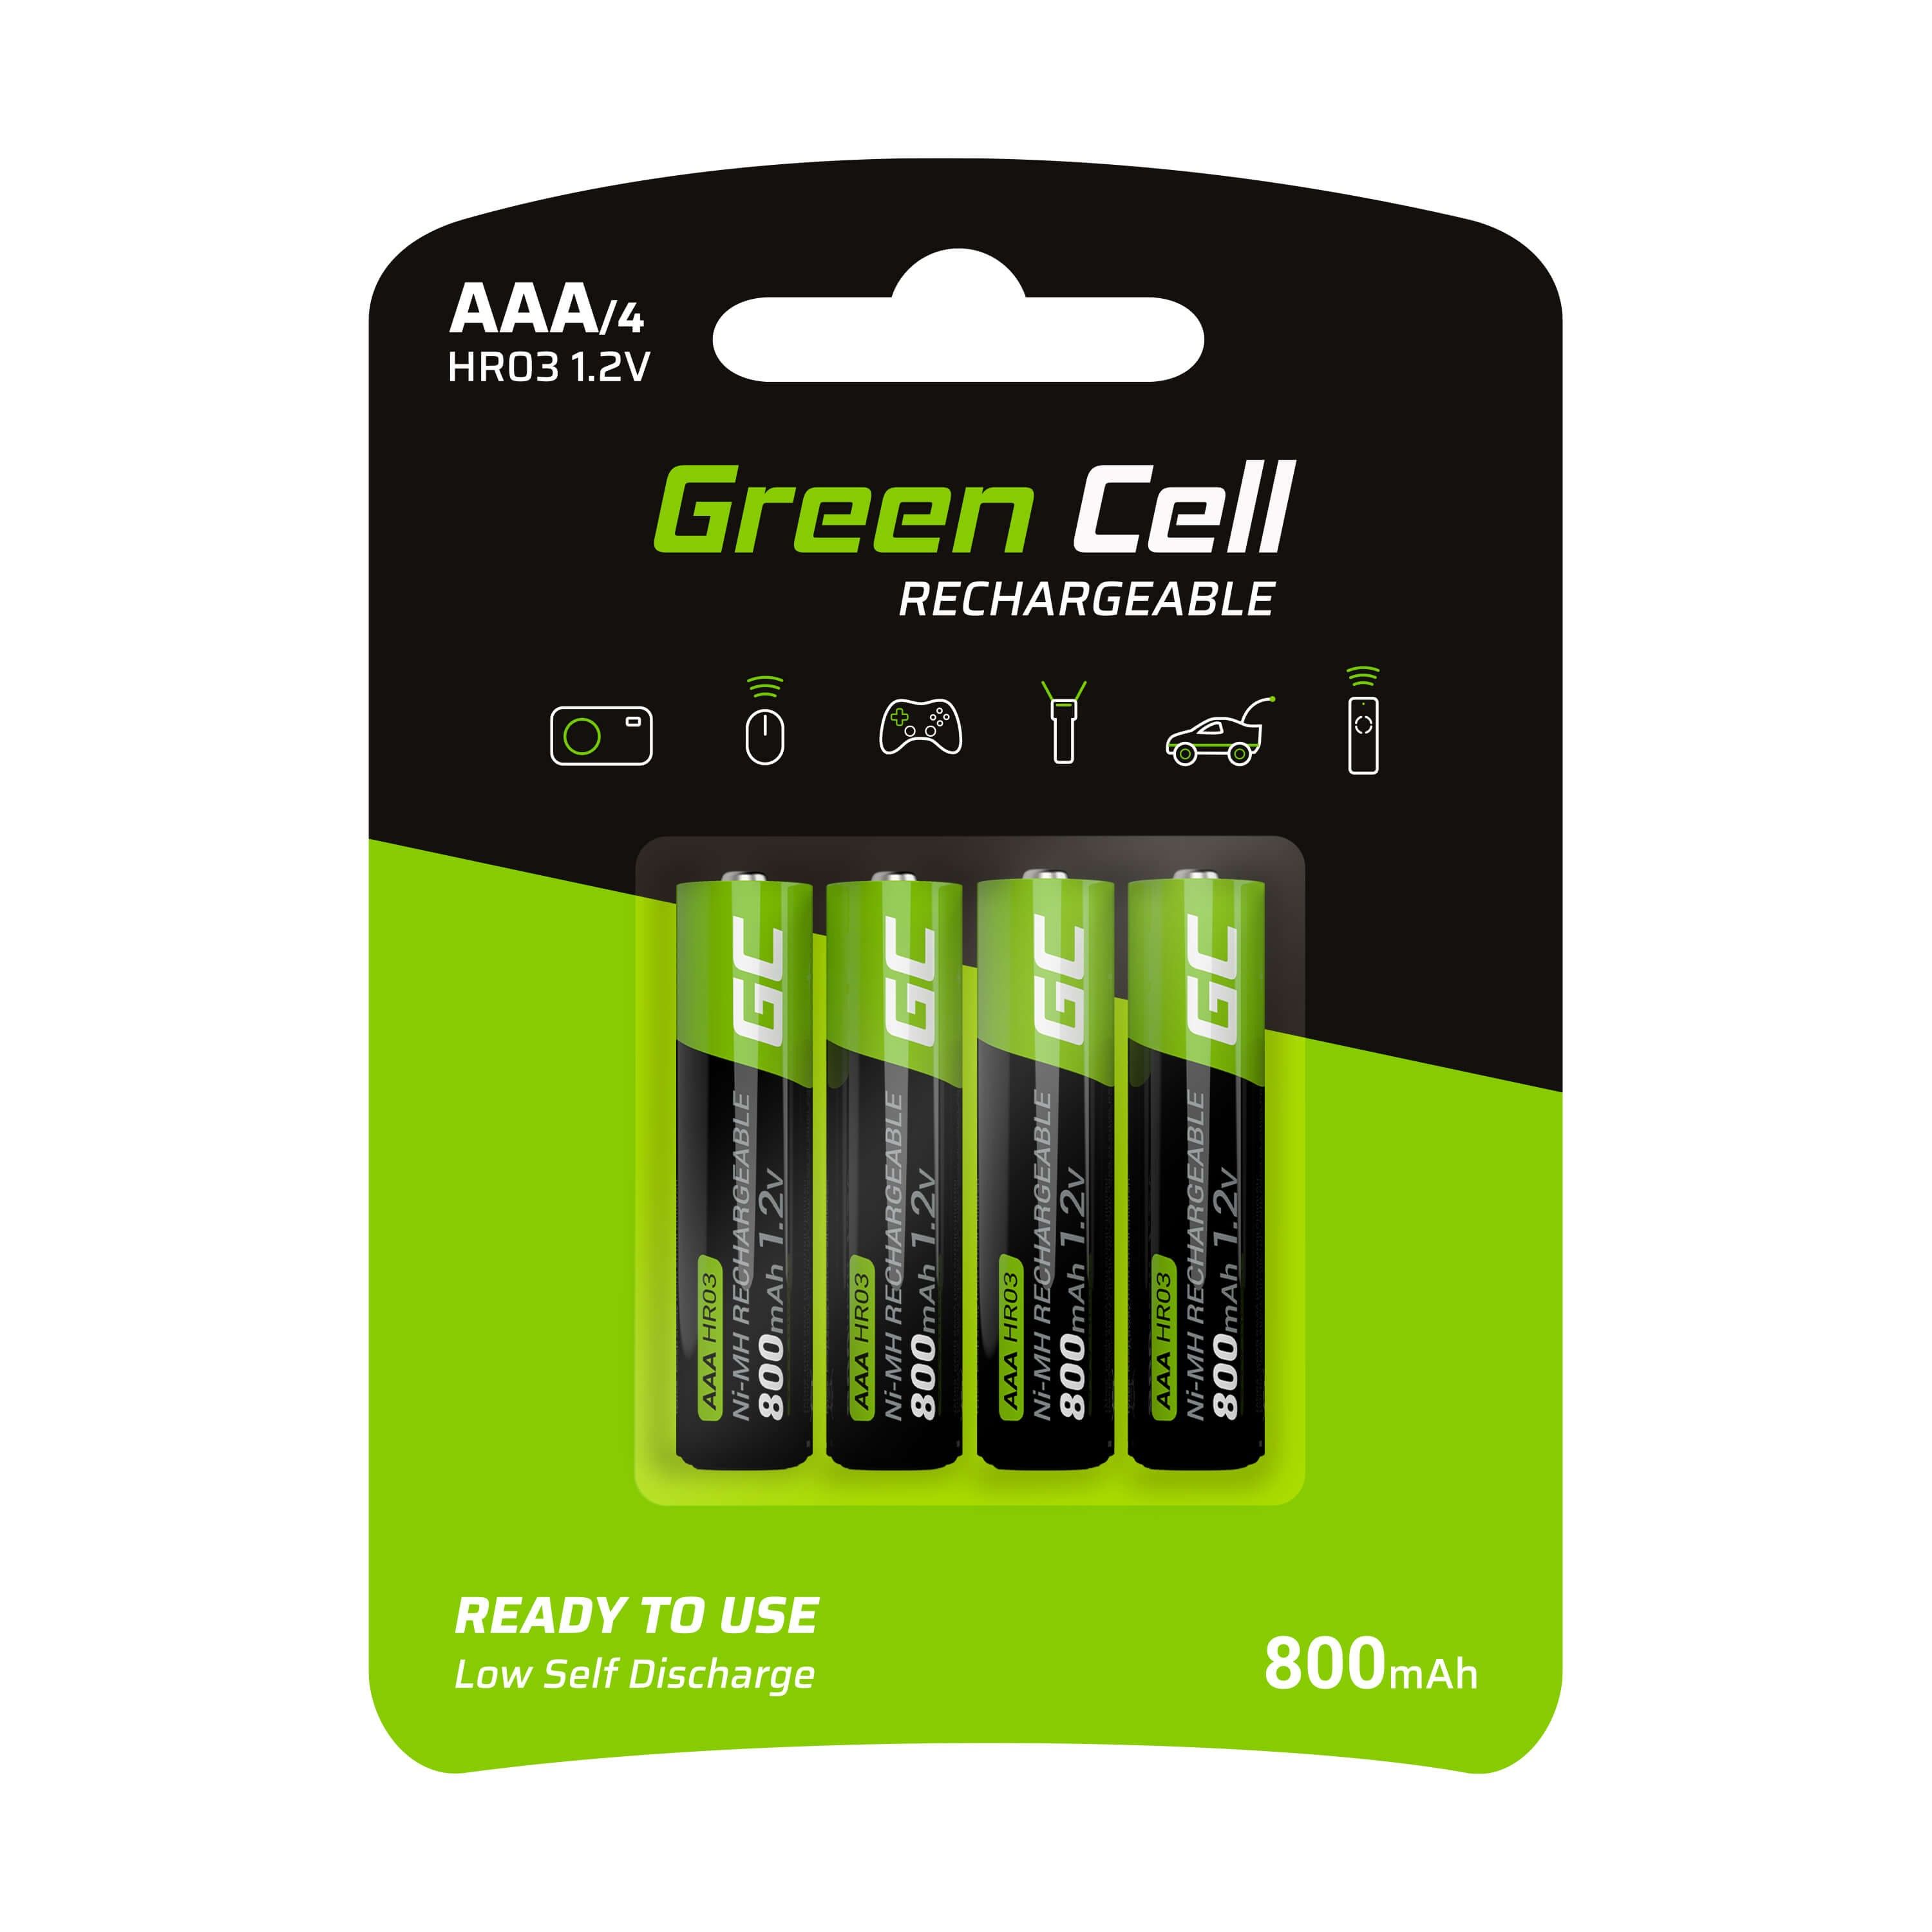 Green Cell GR04 household battery Rechargeable battery AAA Nickel-Metal Hydride (NiMH) 4X AAA R3 800MAH_1